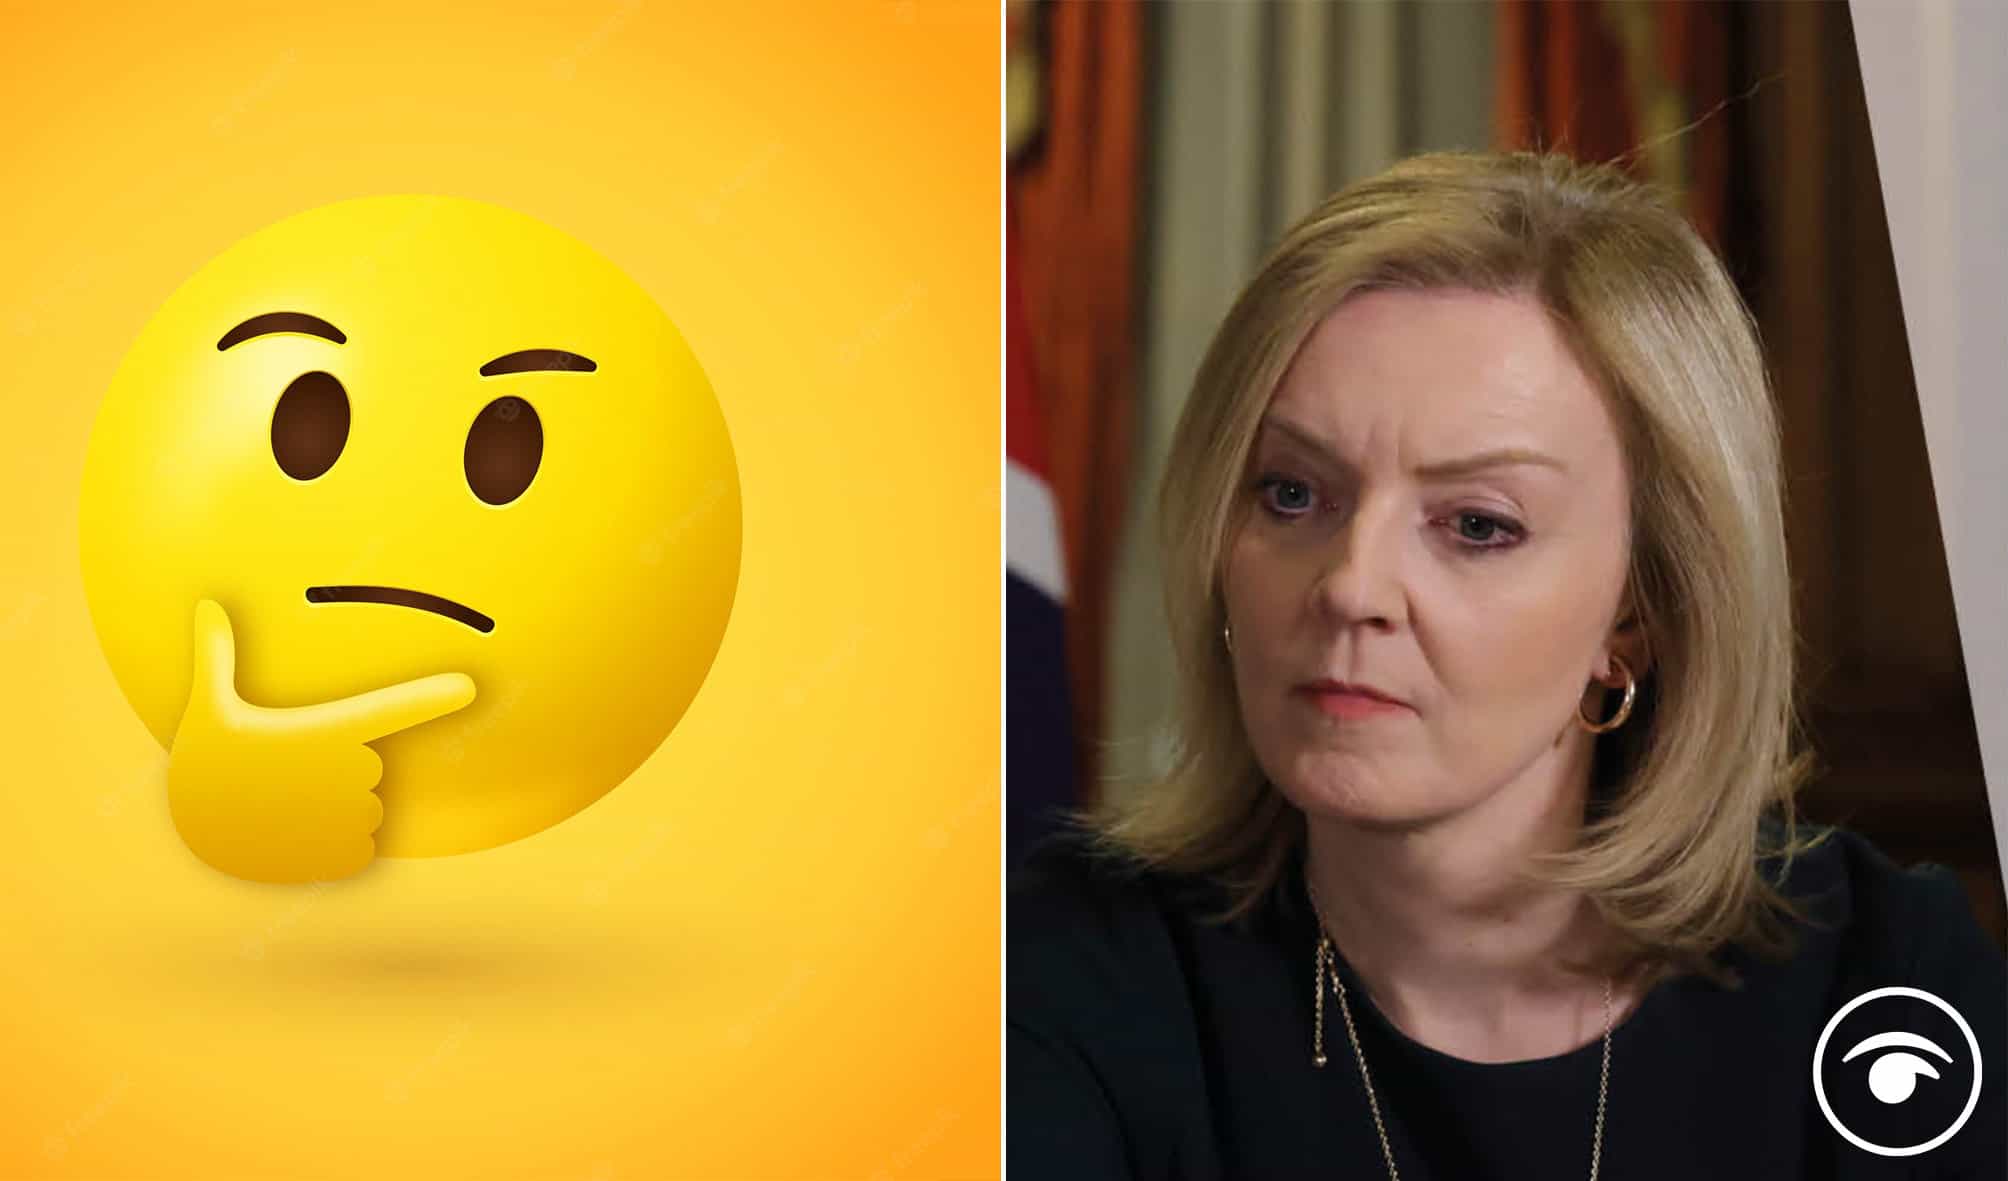 There are some great reactions to a picture of Liz Truss thinking